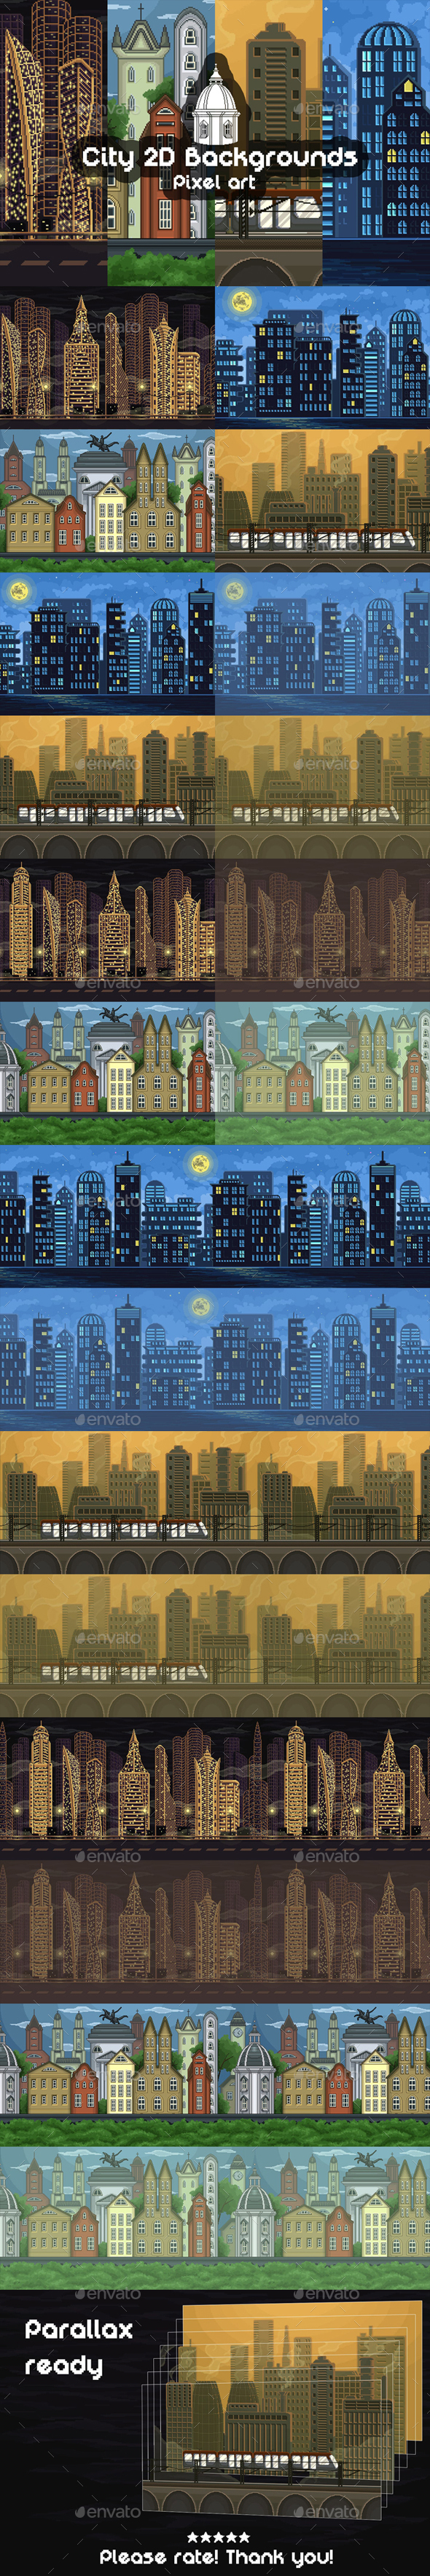 Pixel Art Background Game Assets from GraphicRiver